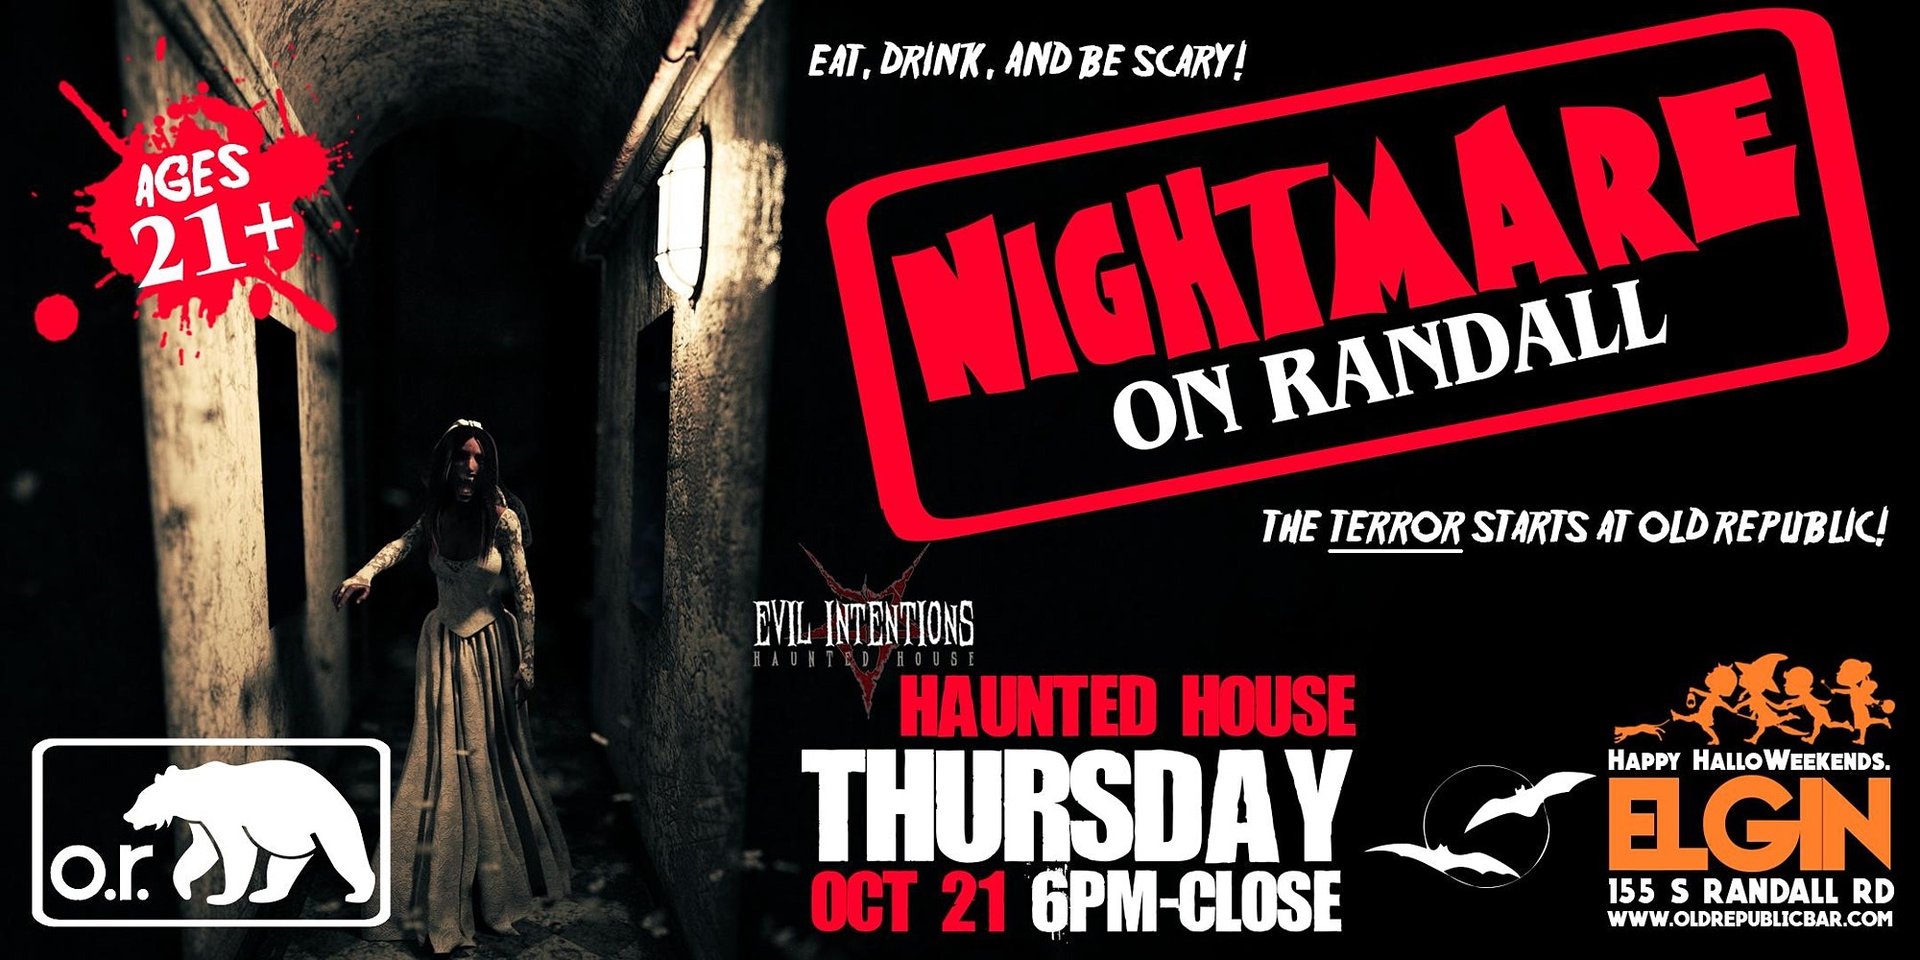 evil intentions haunted house promo code Margurite Morrill